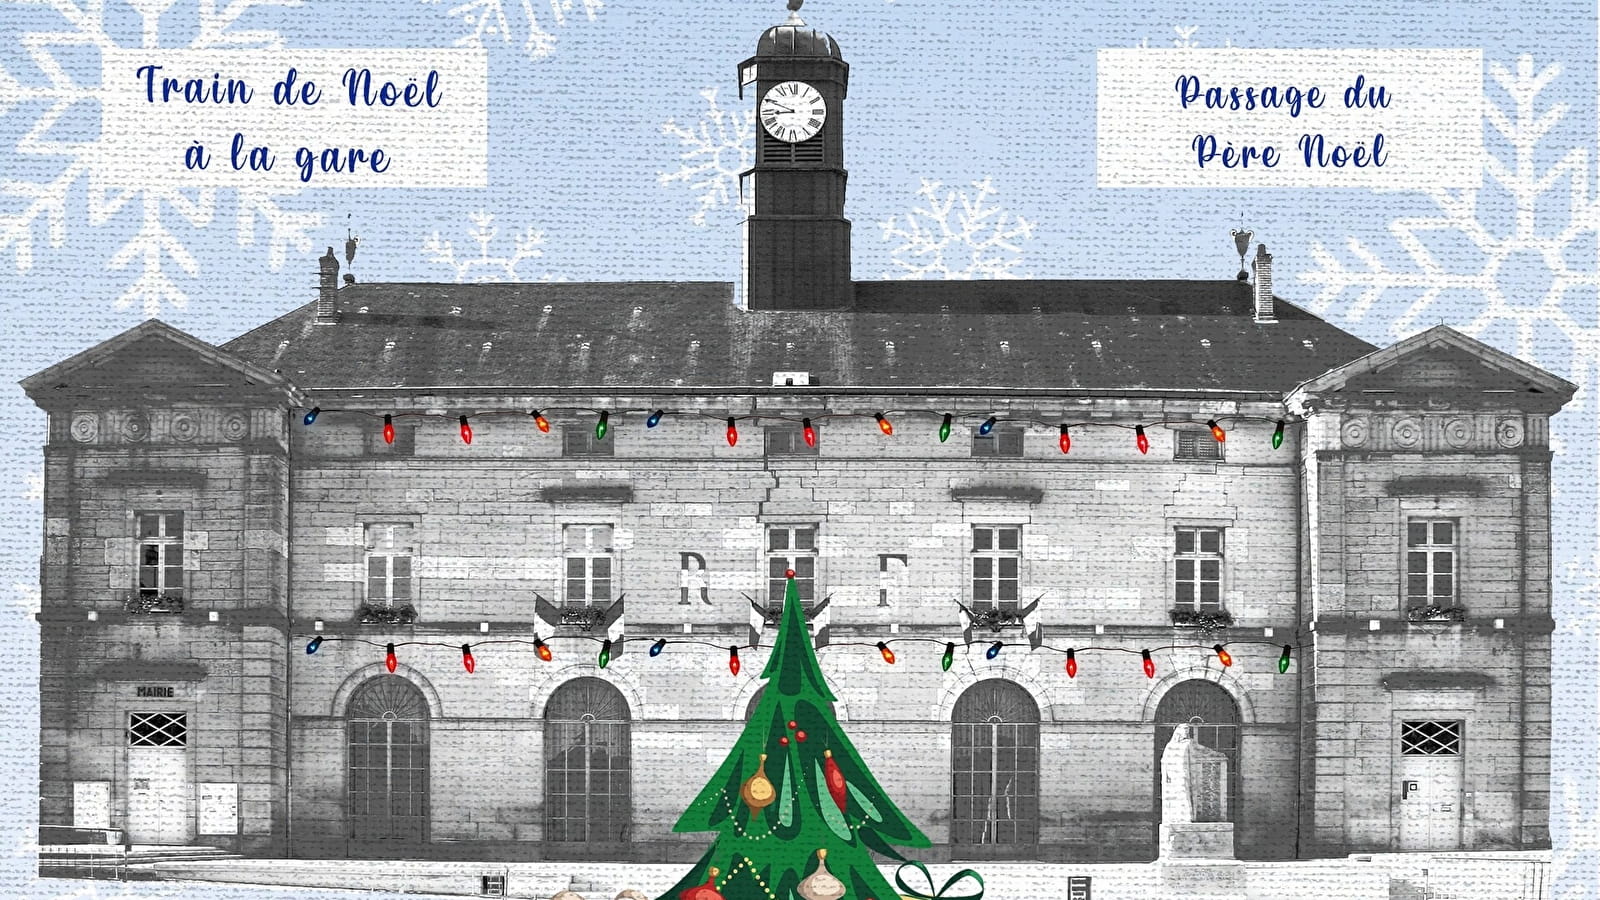 30th Bligny-sur-Ouche Christmas Market